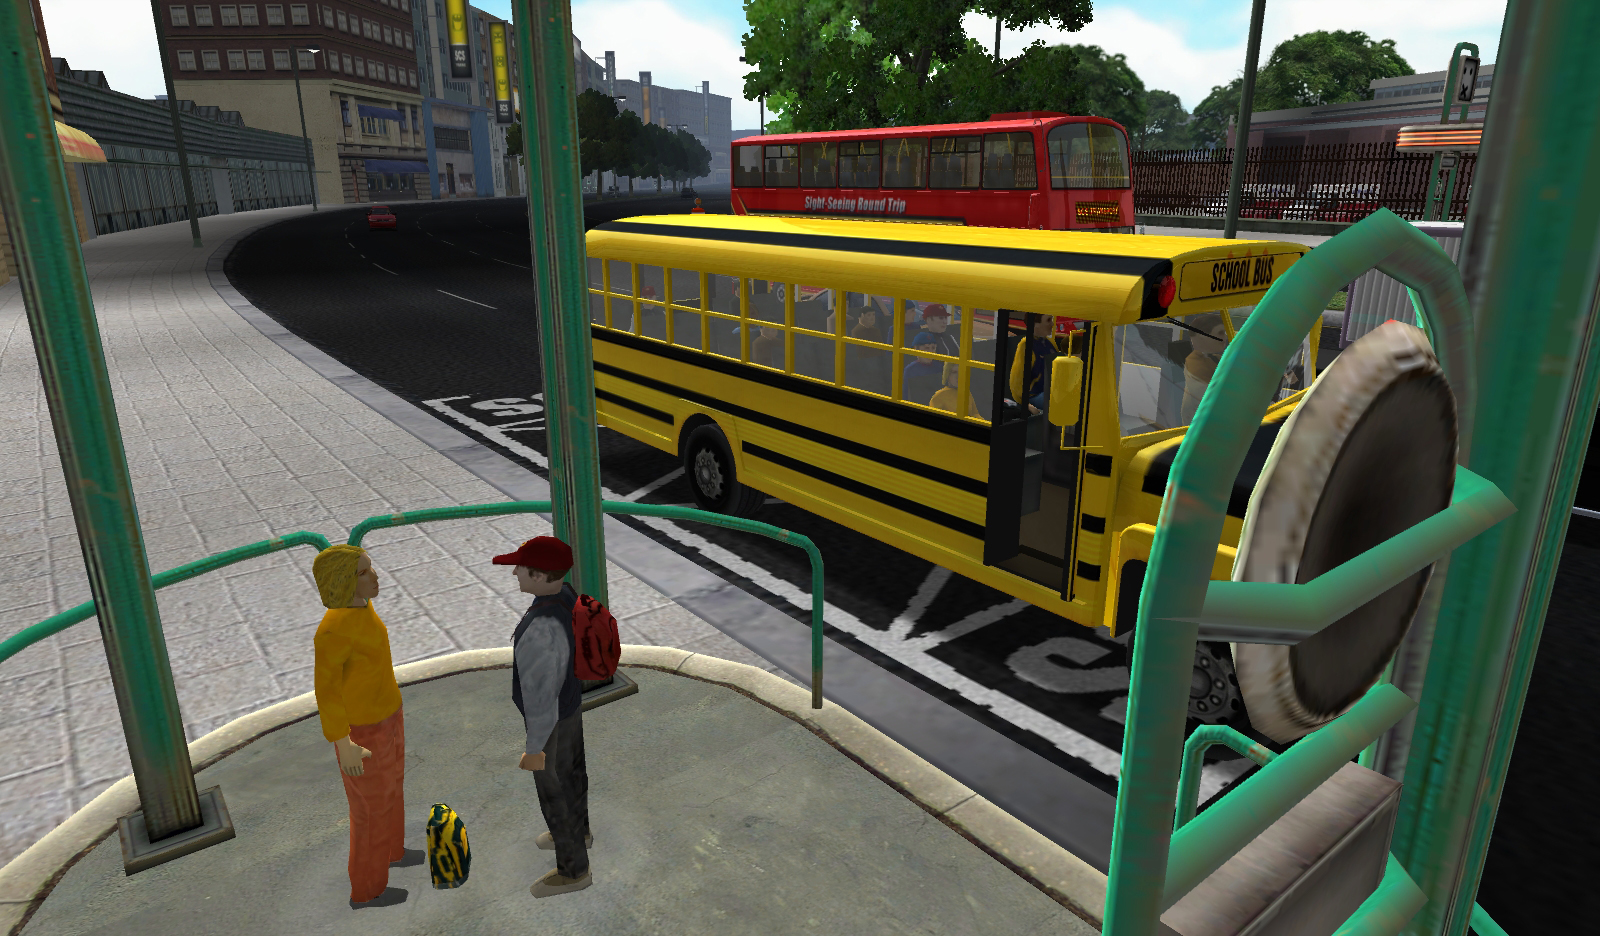 bus driver the game free download